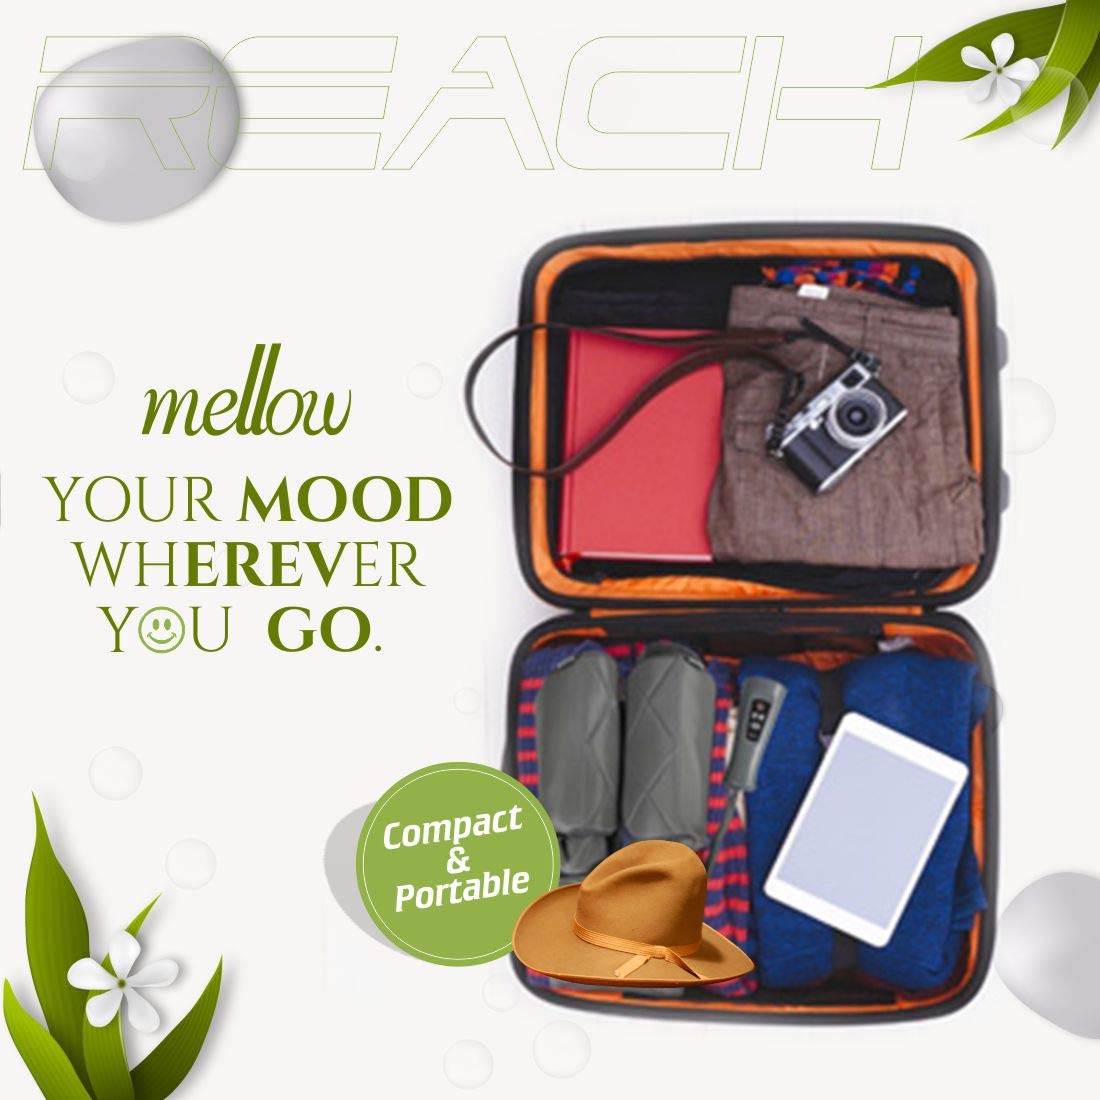 Air Compression Massager in a travel bag- Compact and Portable